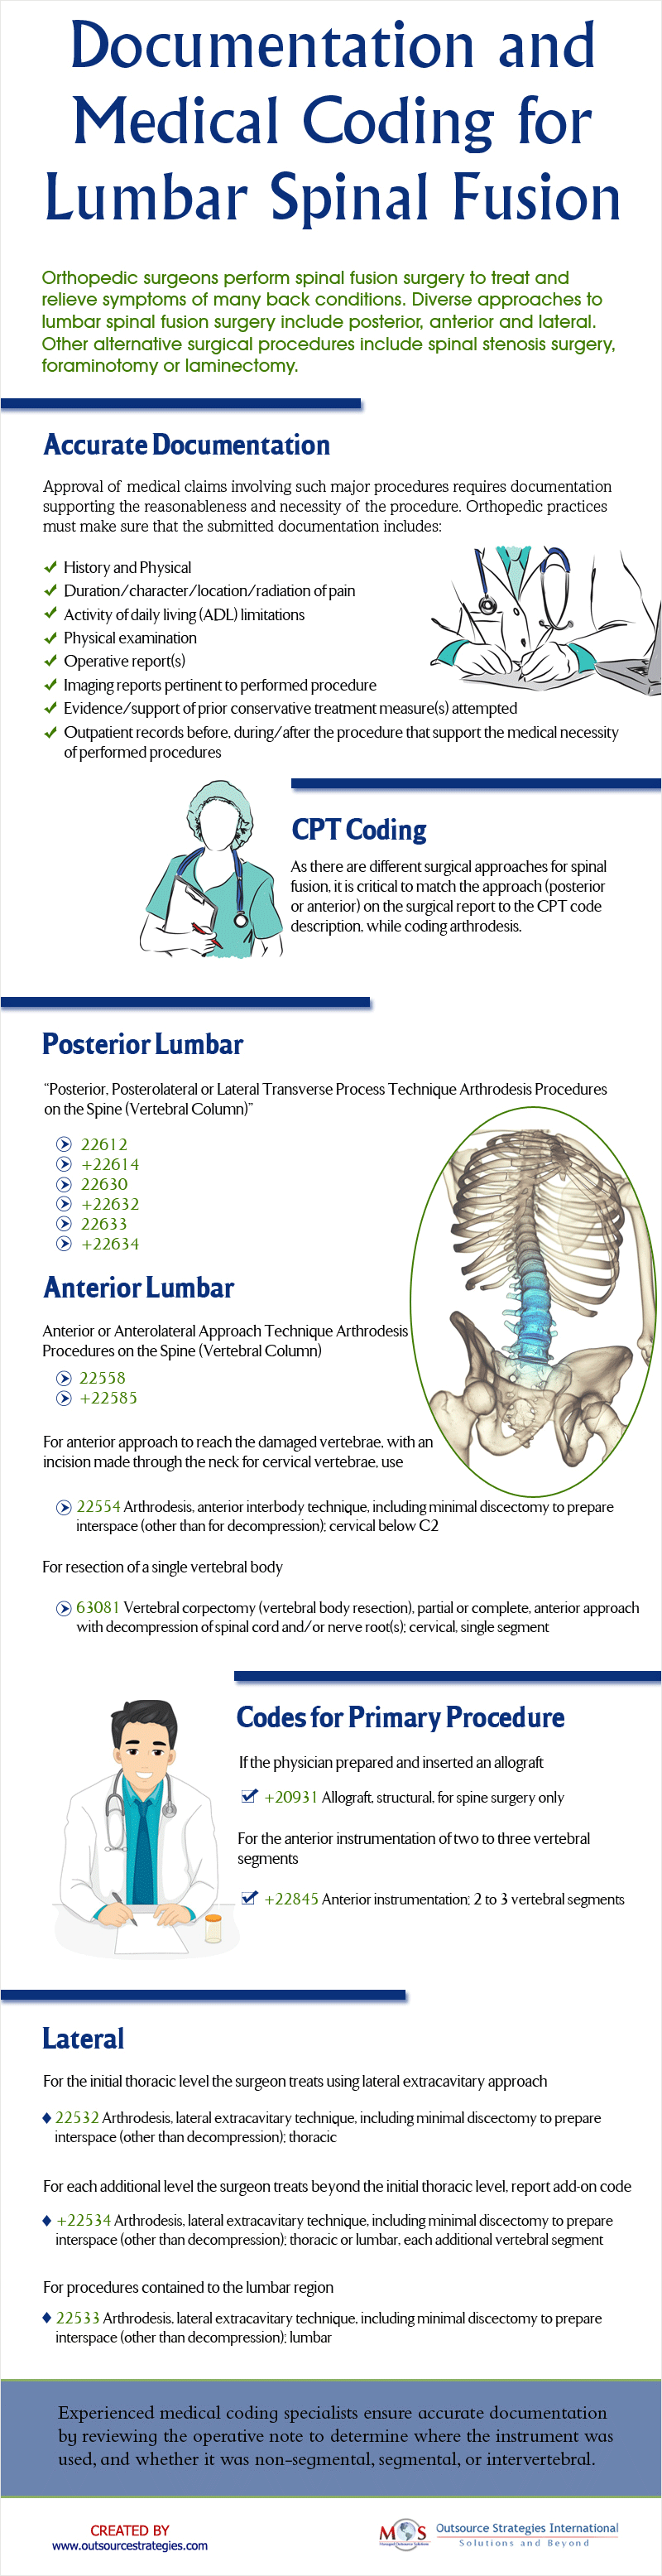 Documentation and Medical Coding for Lumbar Spinal Fusion